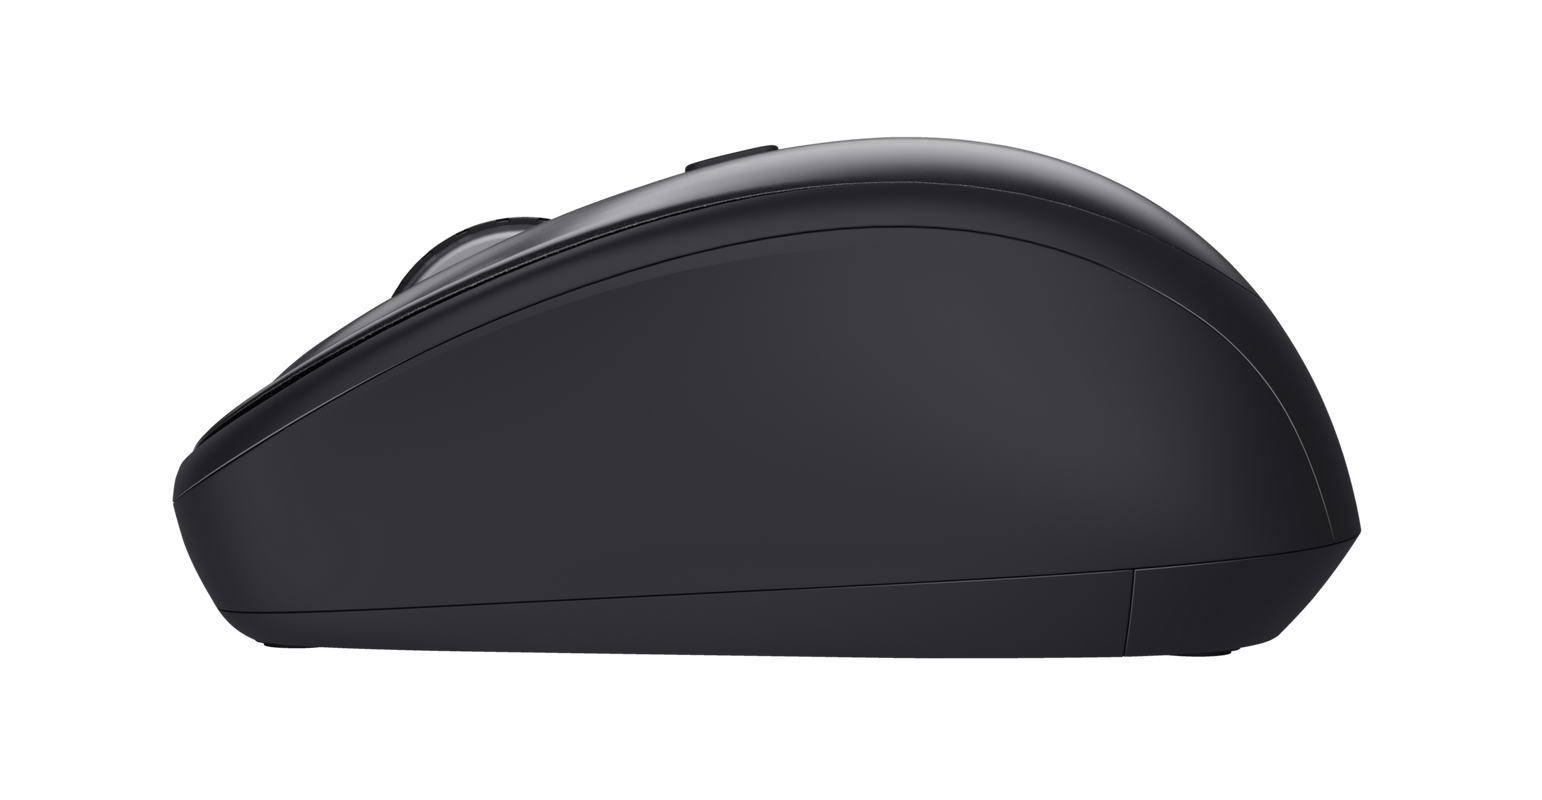 TM-201 Compact Wireless Mouse Eco-Side